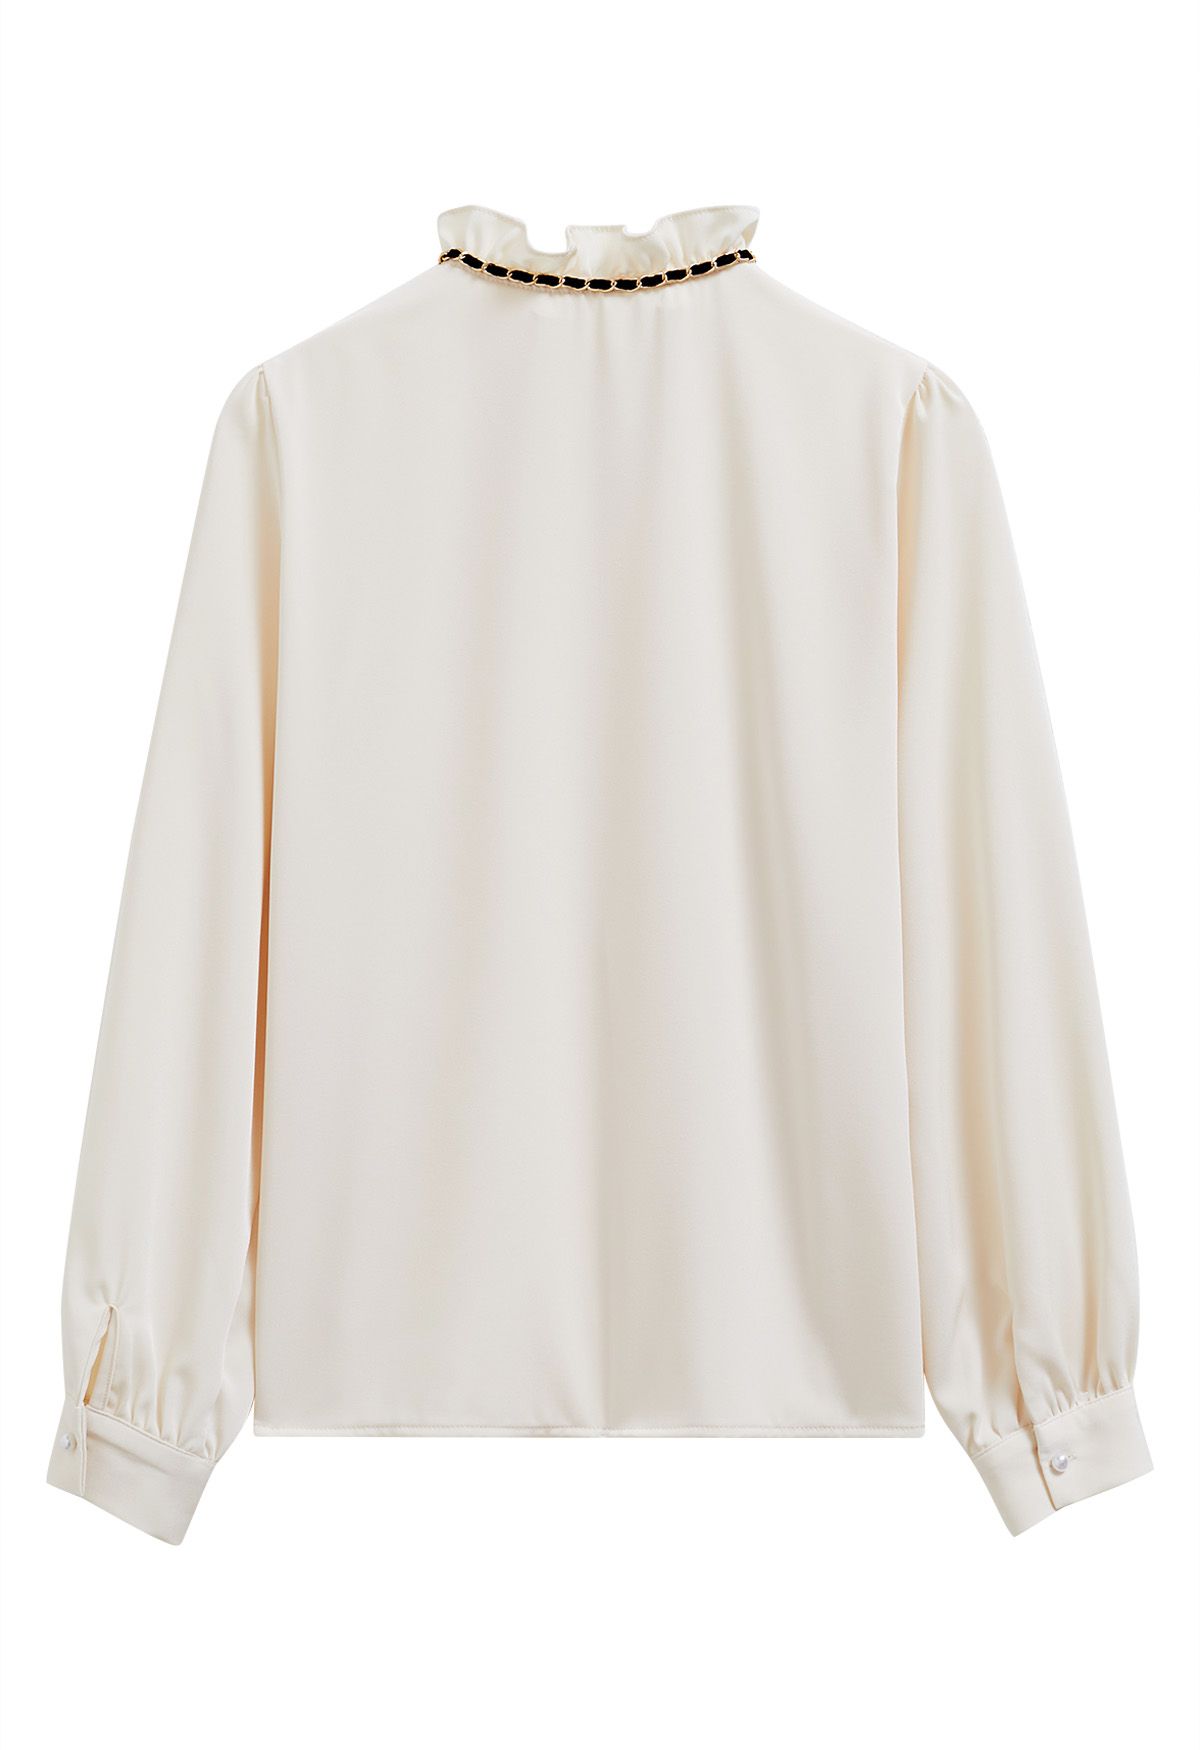 Pearly Rose Chain Ruffle Neckline Buttoned Shirt in Cream